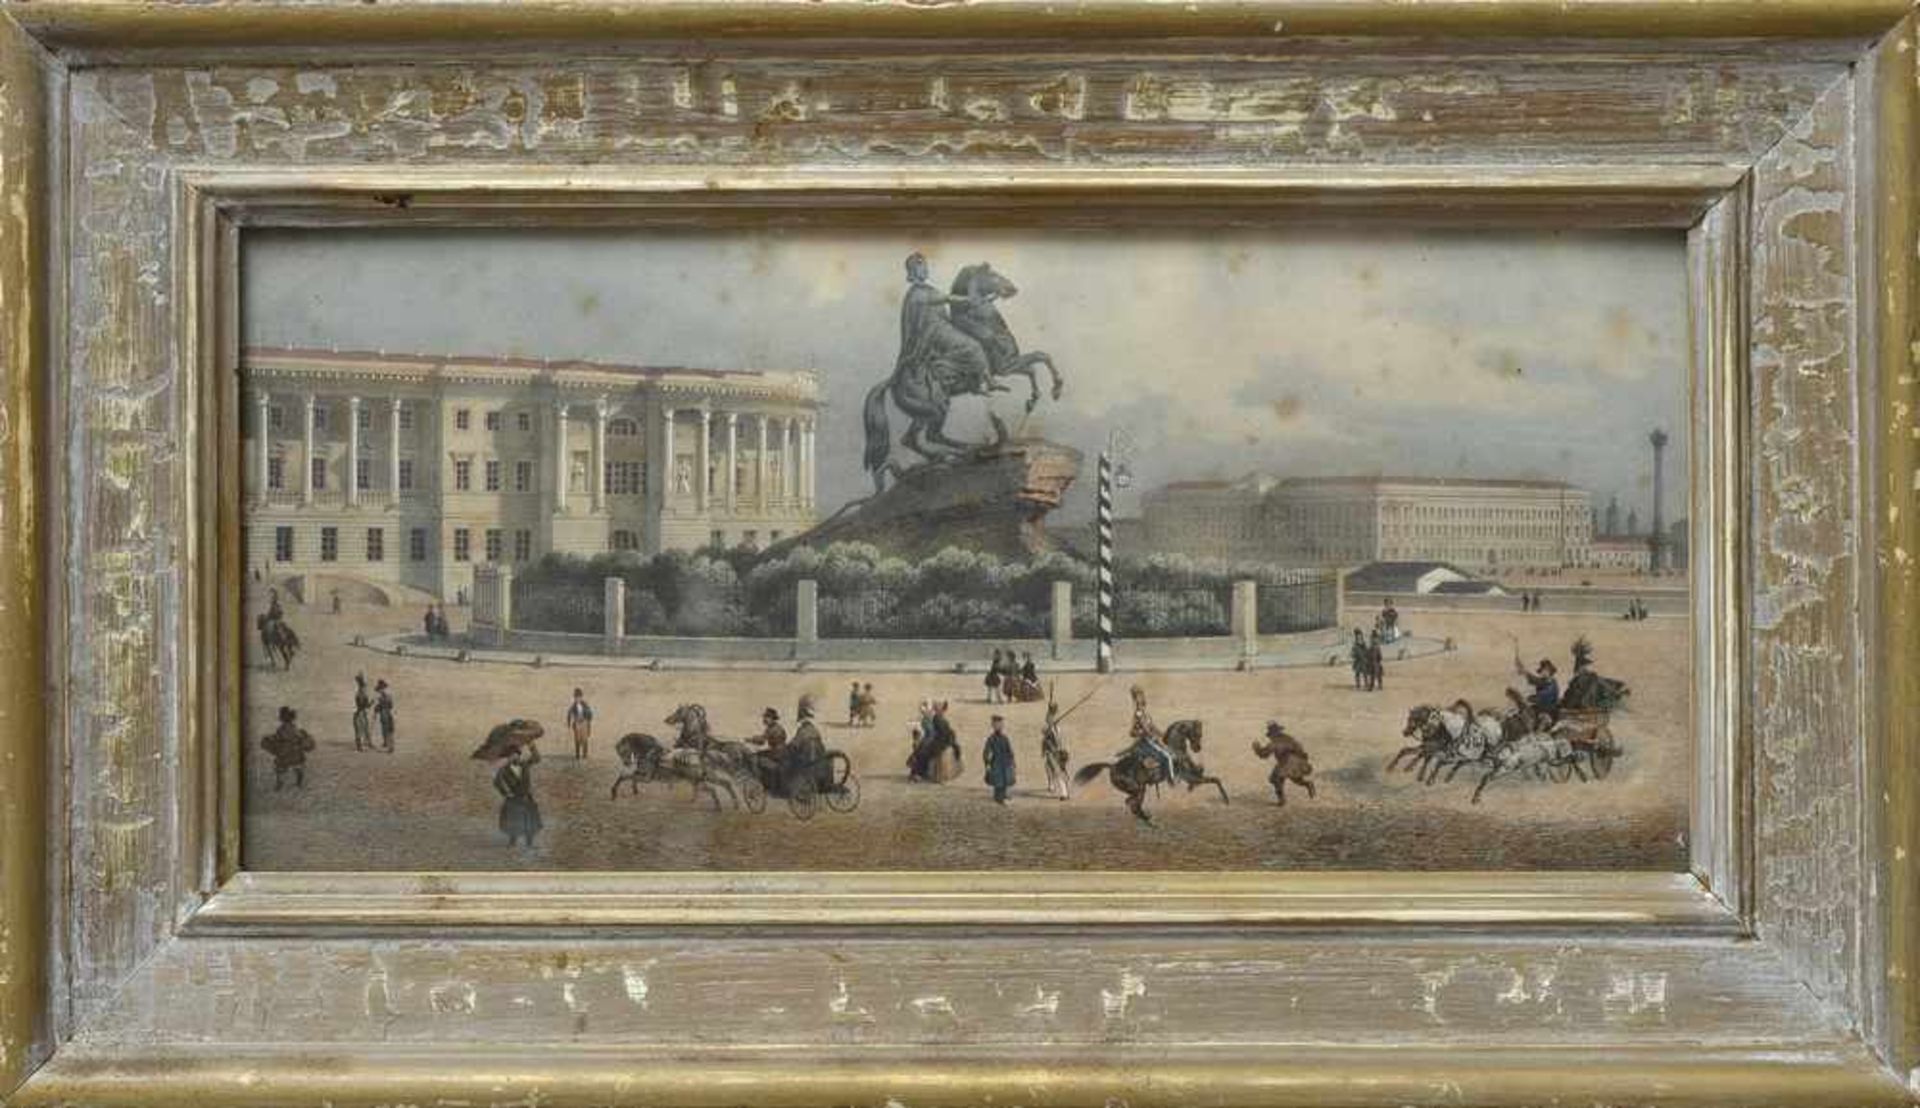 Bichebois, Louis Ph. A. (1801-1850) "Peter der Große Denkmal in St. Petersburg", Lithographie, - Image 2 of 2